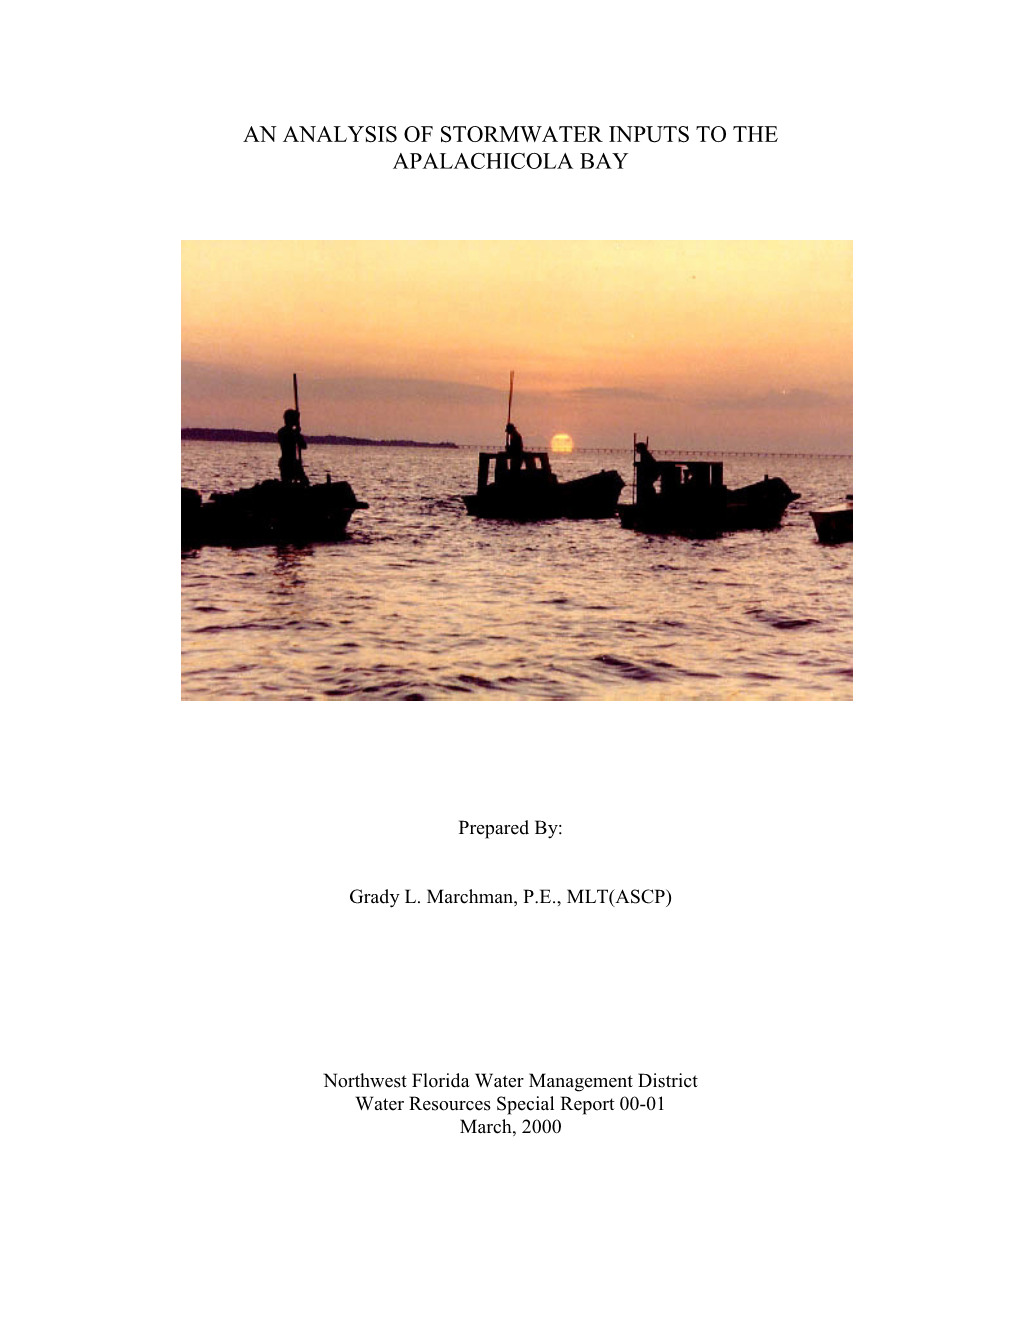 An Analysis of Stormwater Inputs to the Apalachicola Bay